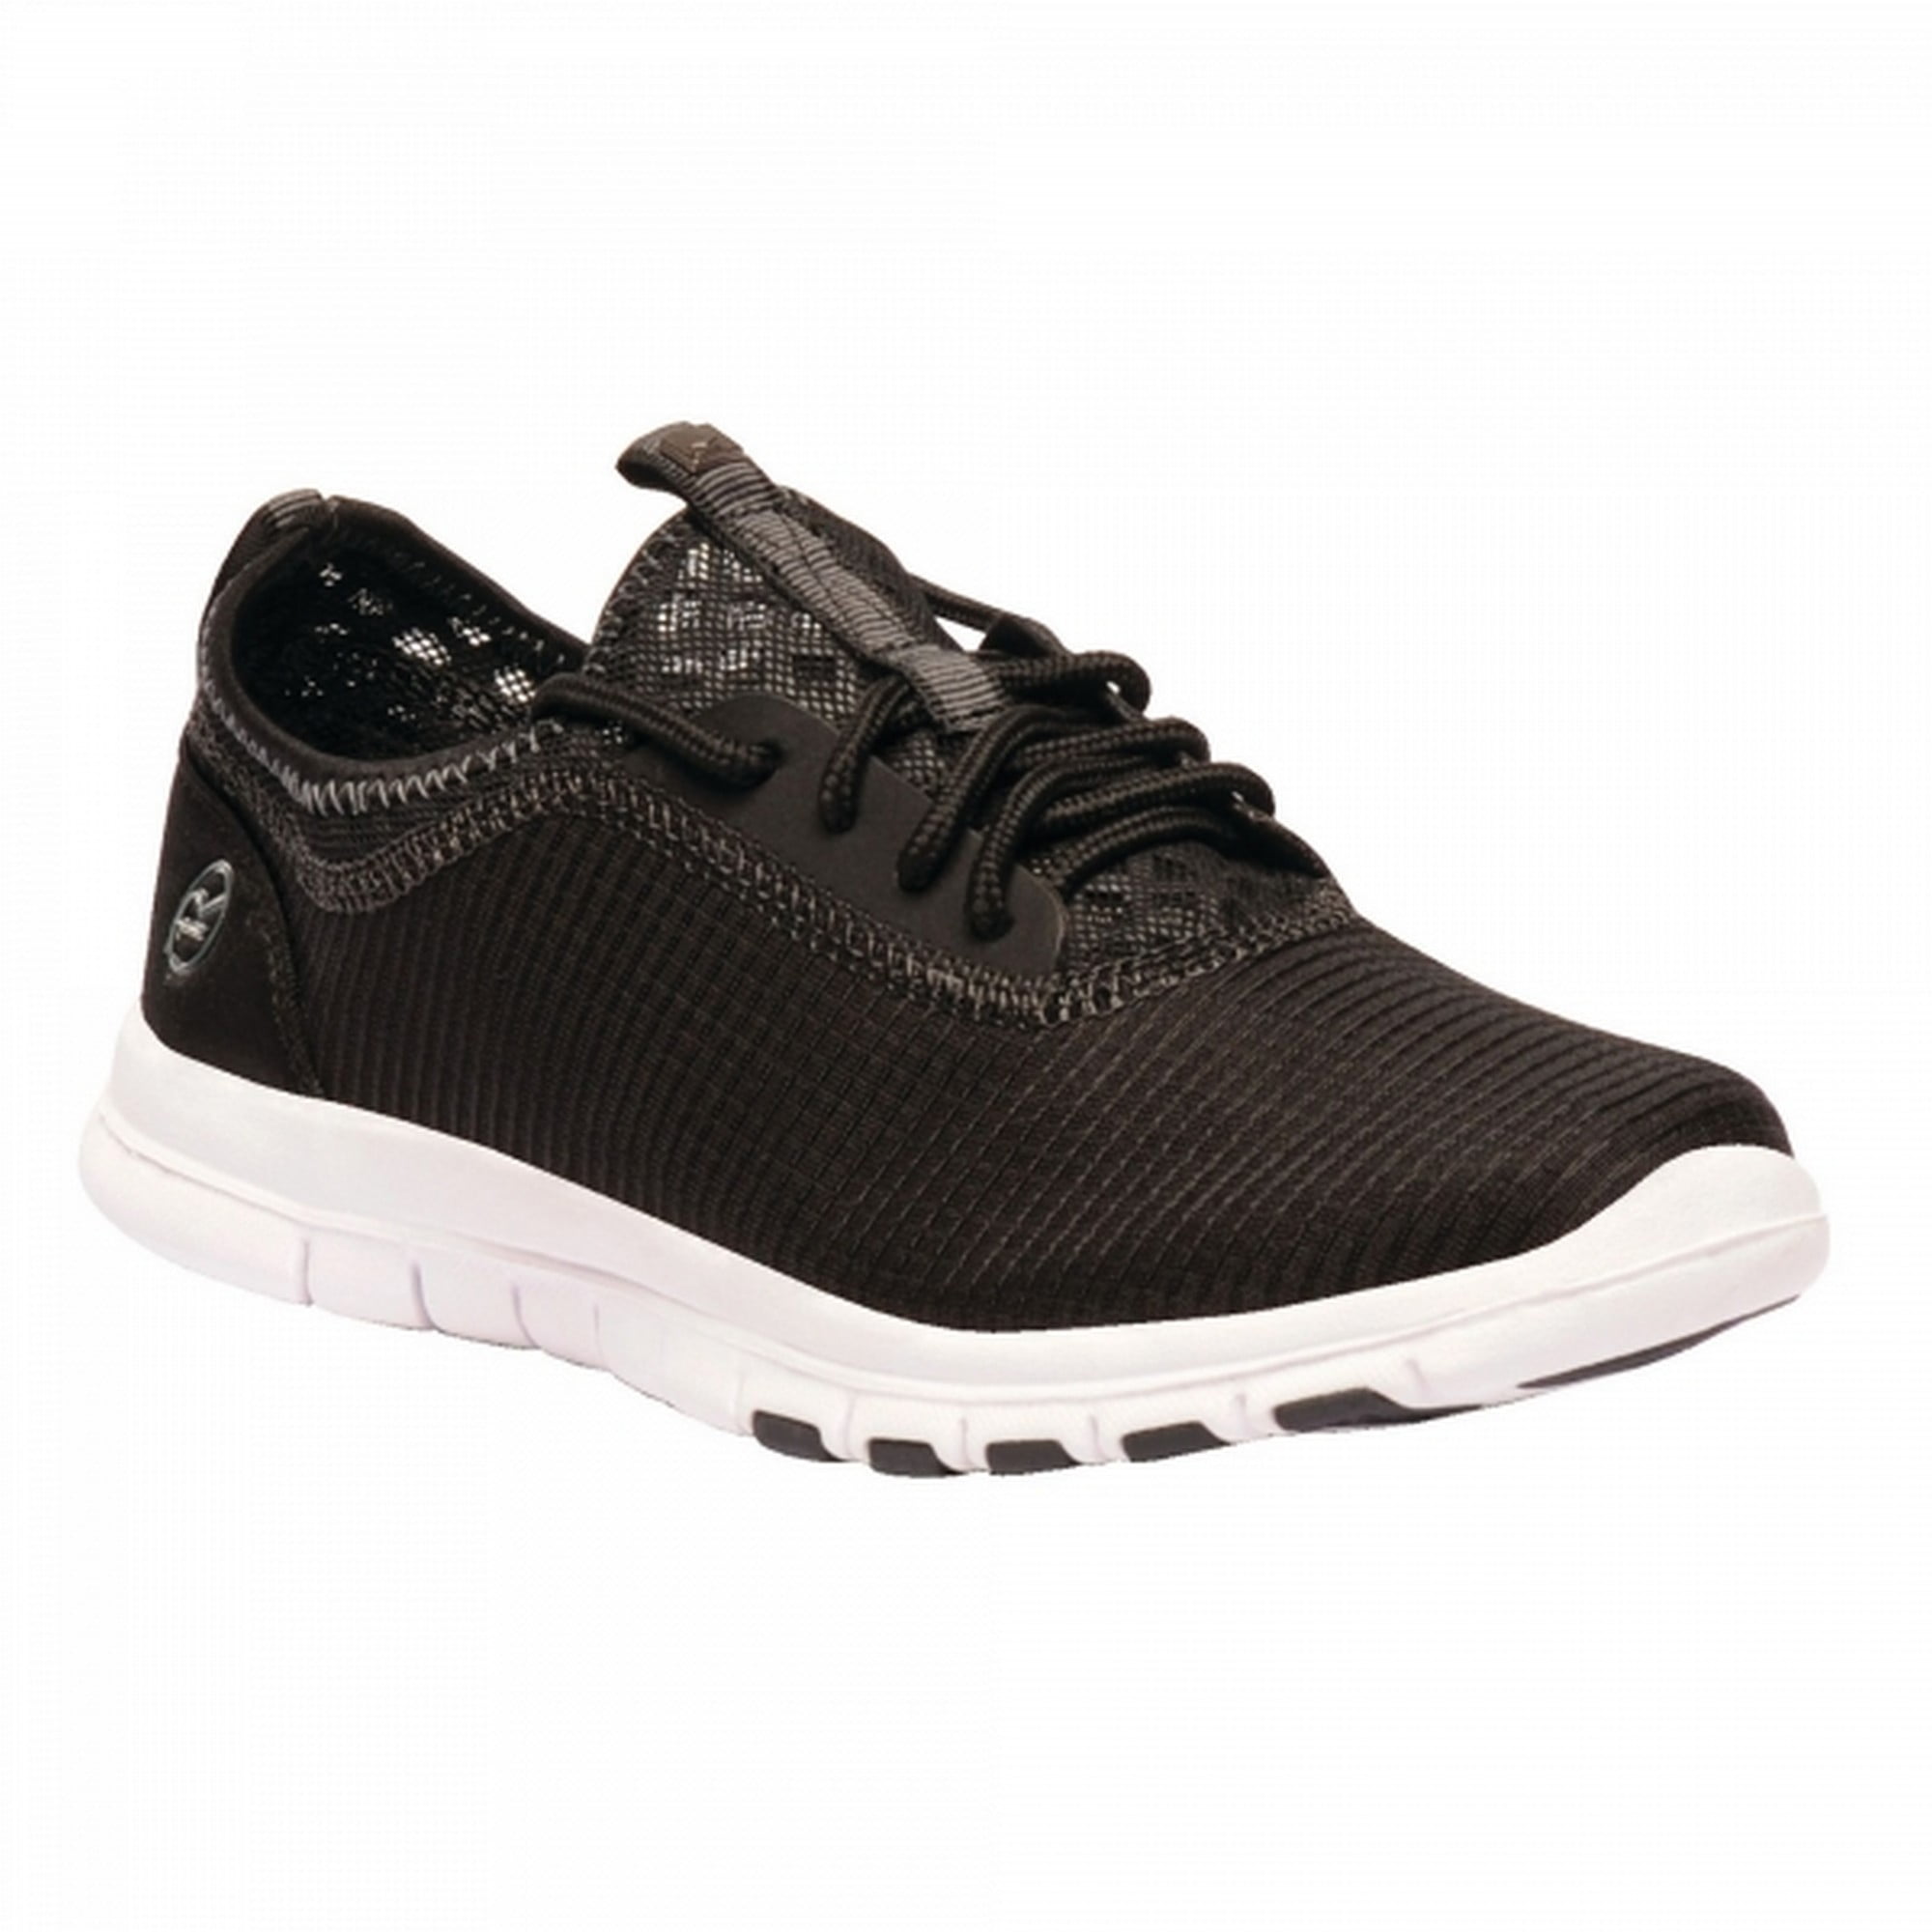 Buy > jd trainers size 6 > in stock